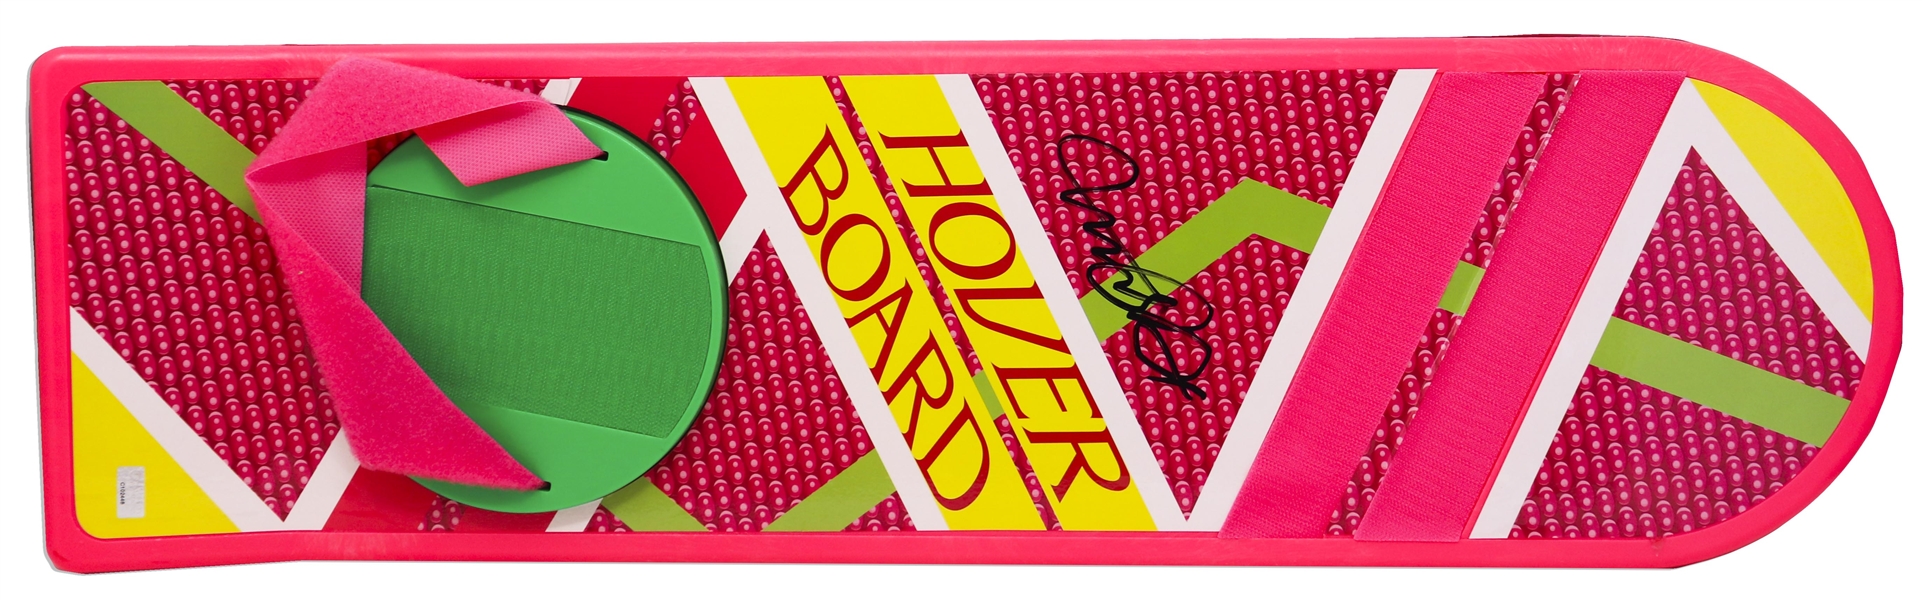 ''Back to the Future II'' Hoverboard Signed by Michael J. Fox